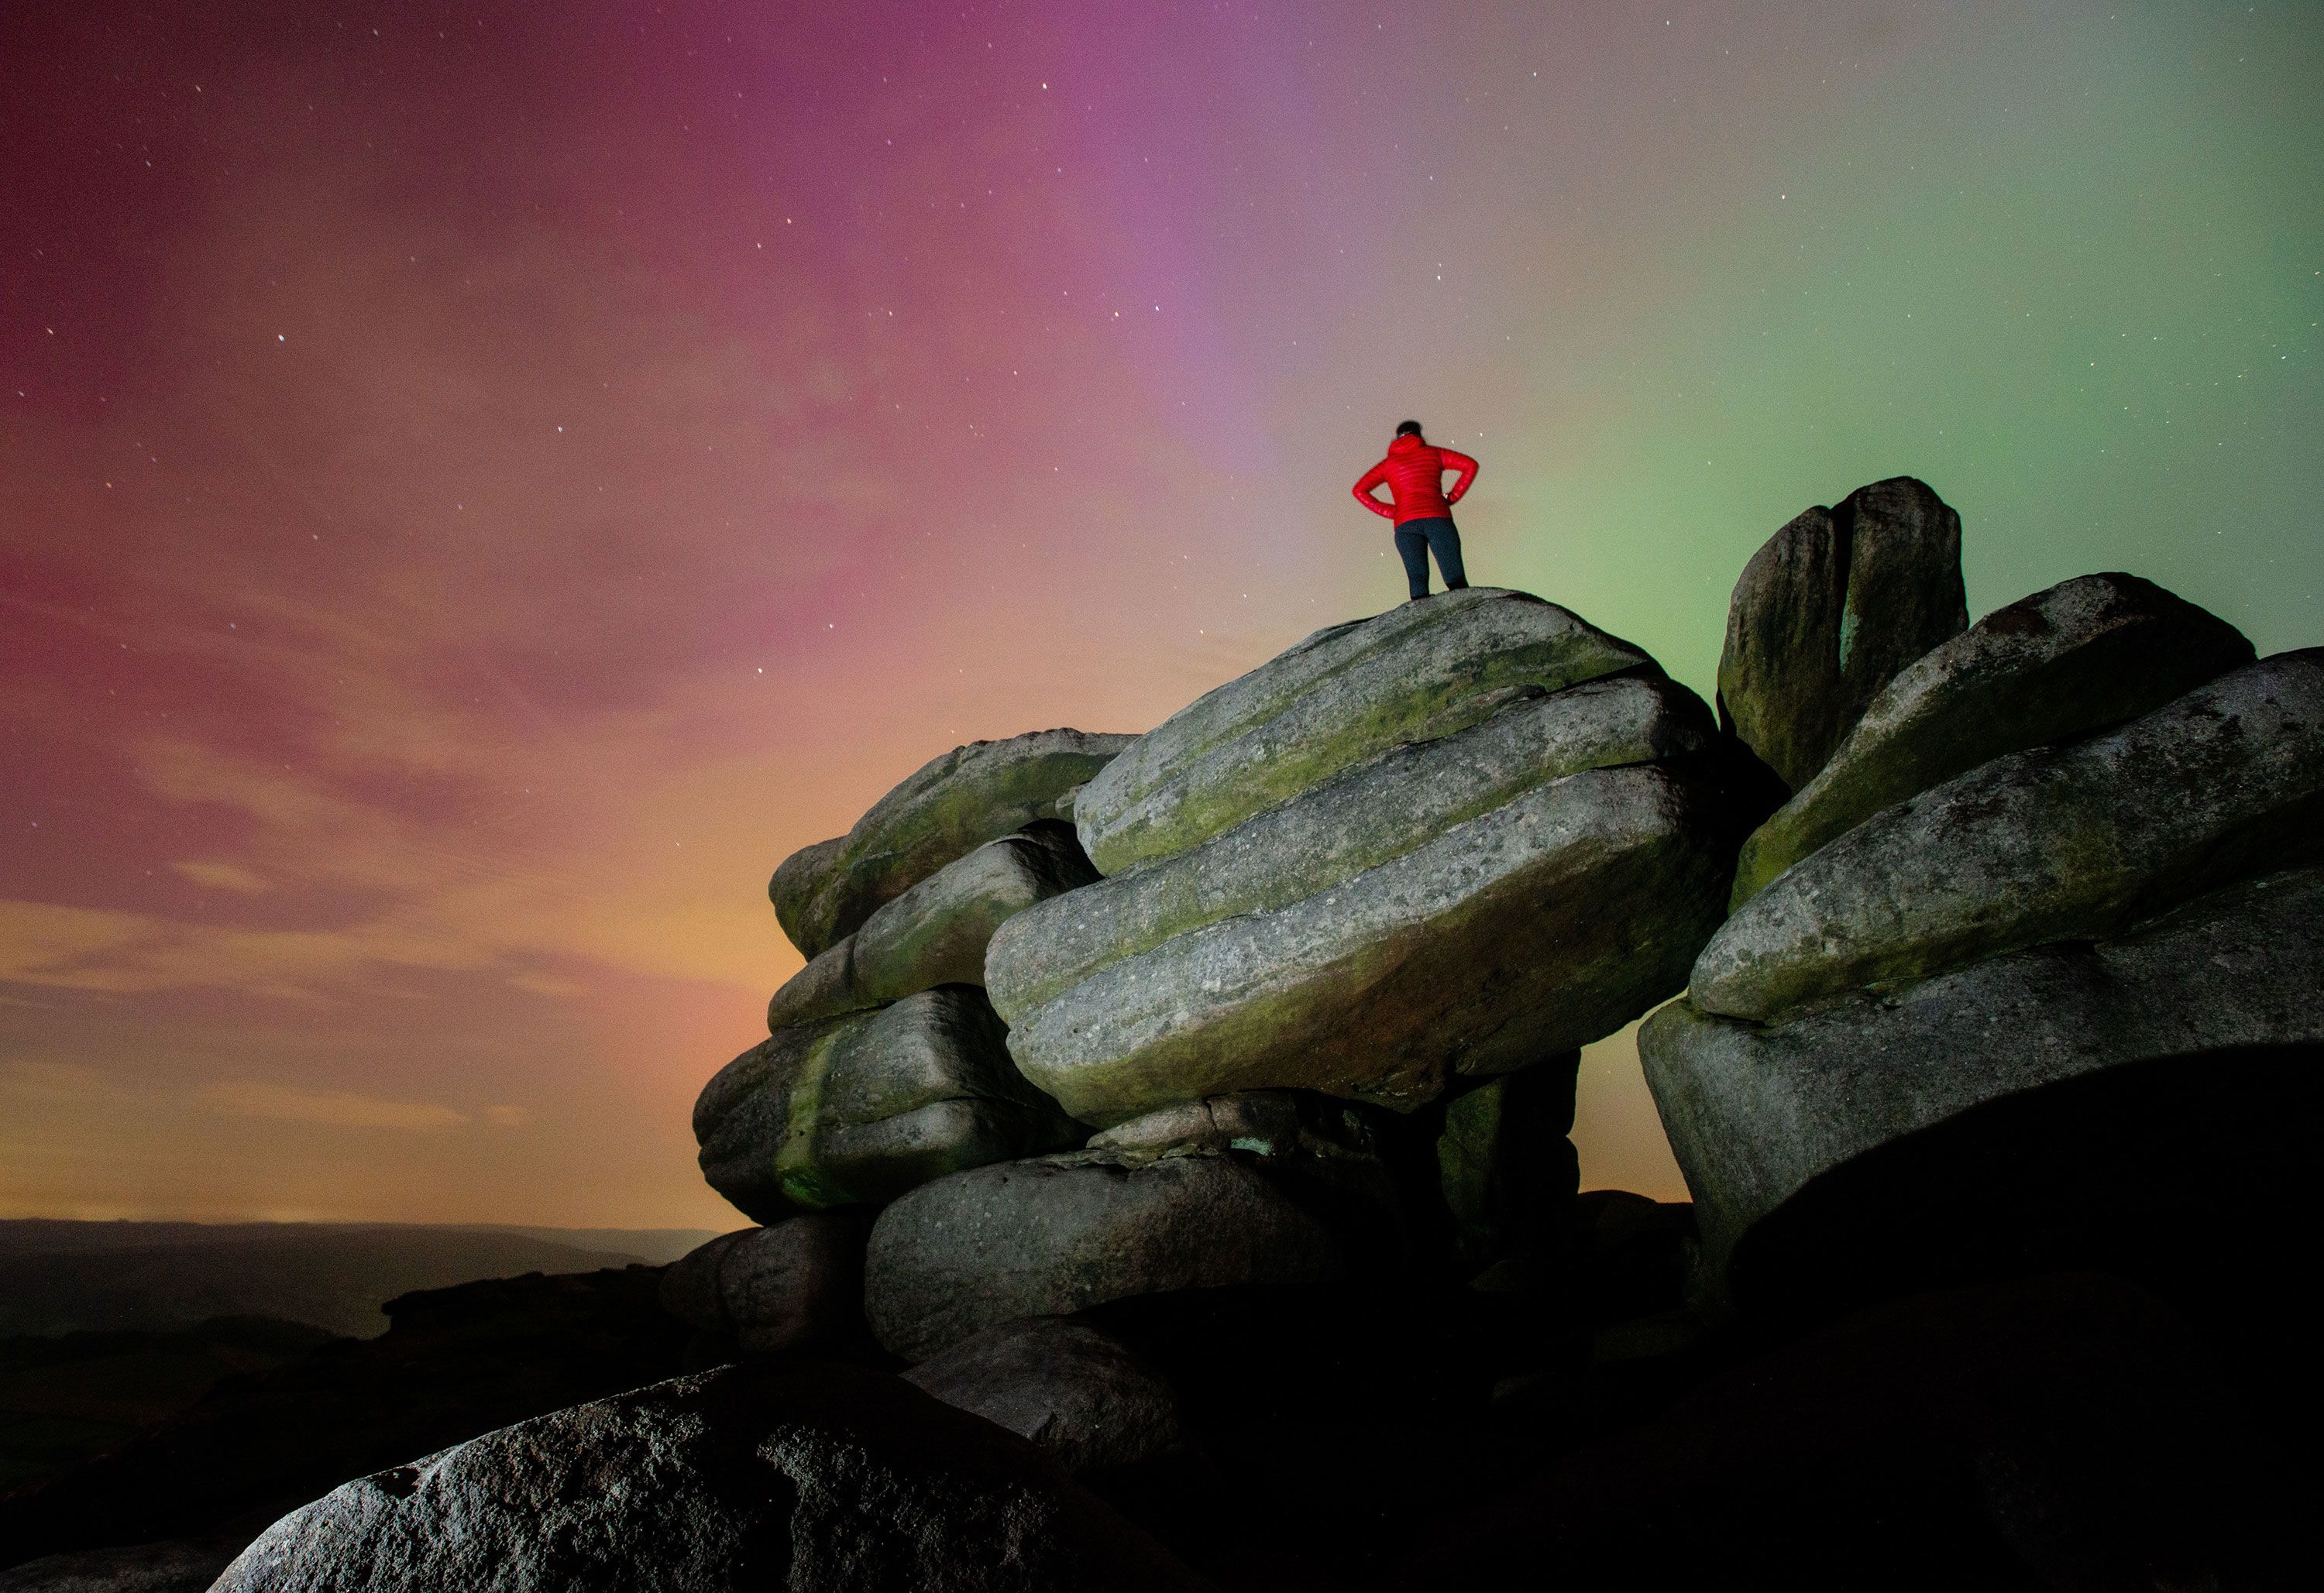 A person watches the northern lights from atop a rock formation near Sheffield, England, on Saturday, May 11.